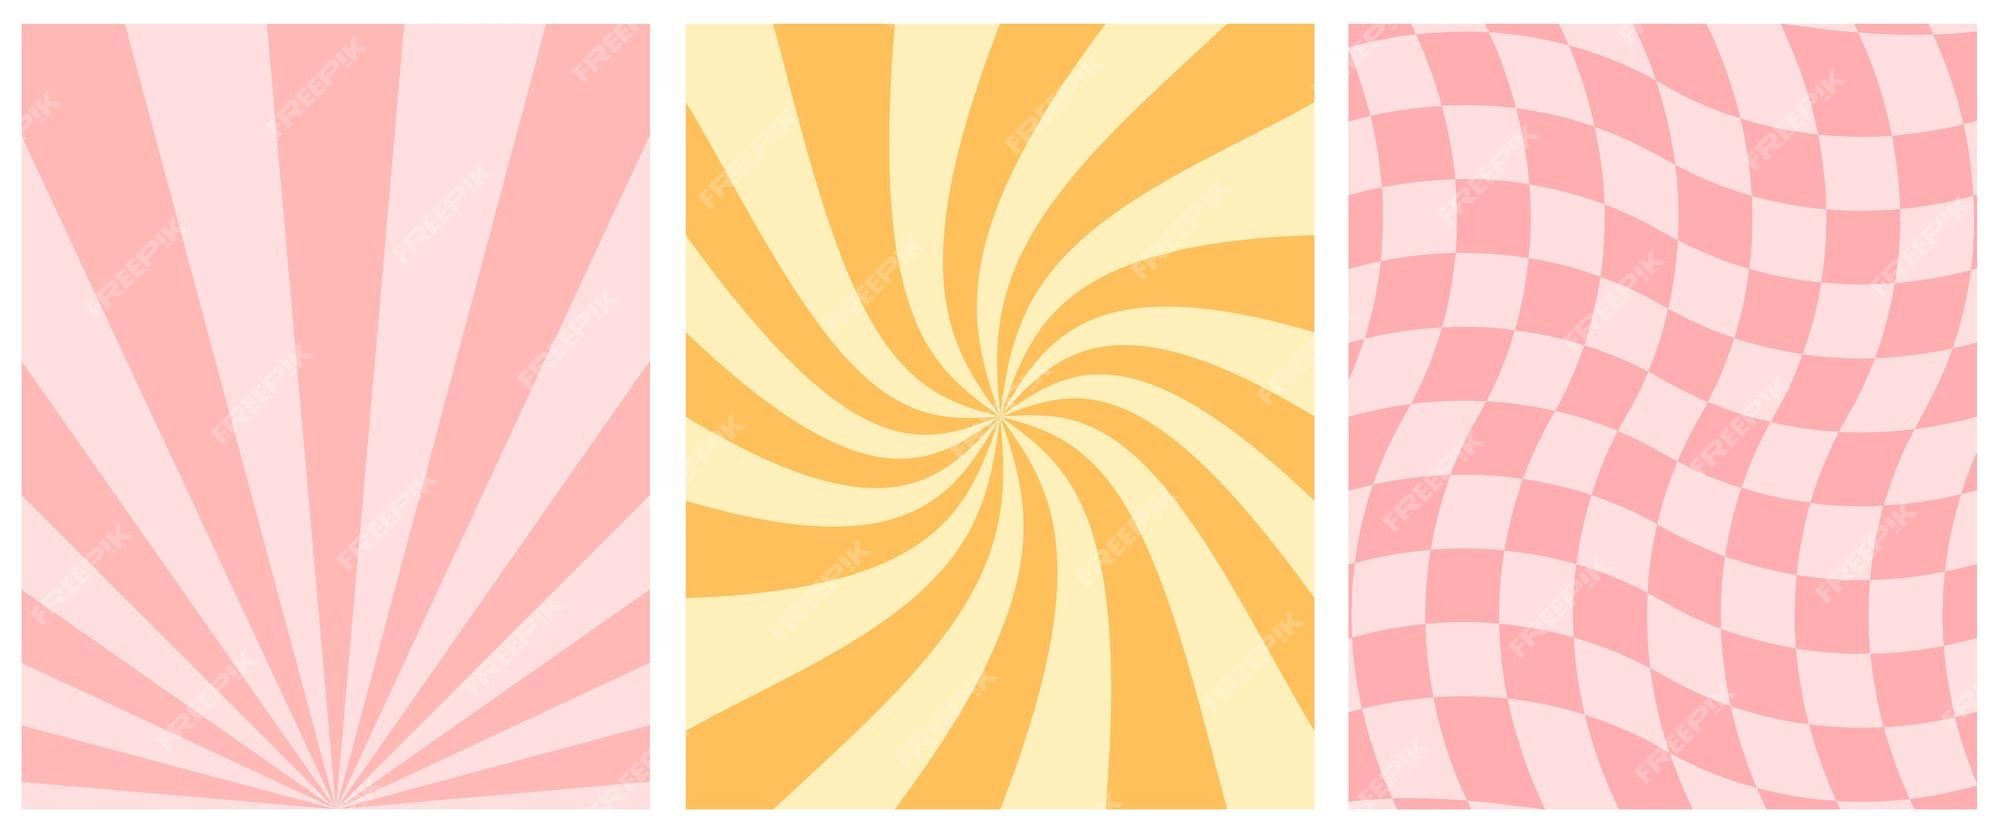 Set of groovy retro backgrounds. 70s vintage design. Vector illustration. - Abstract